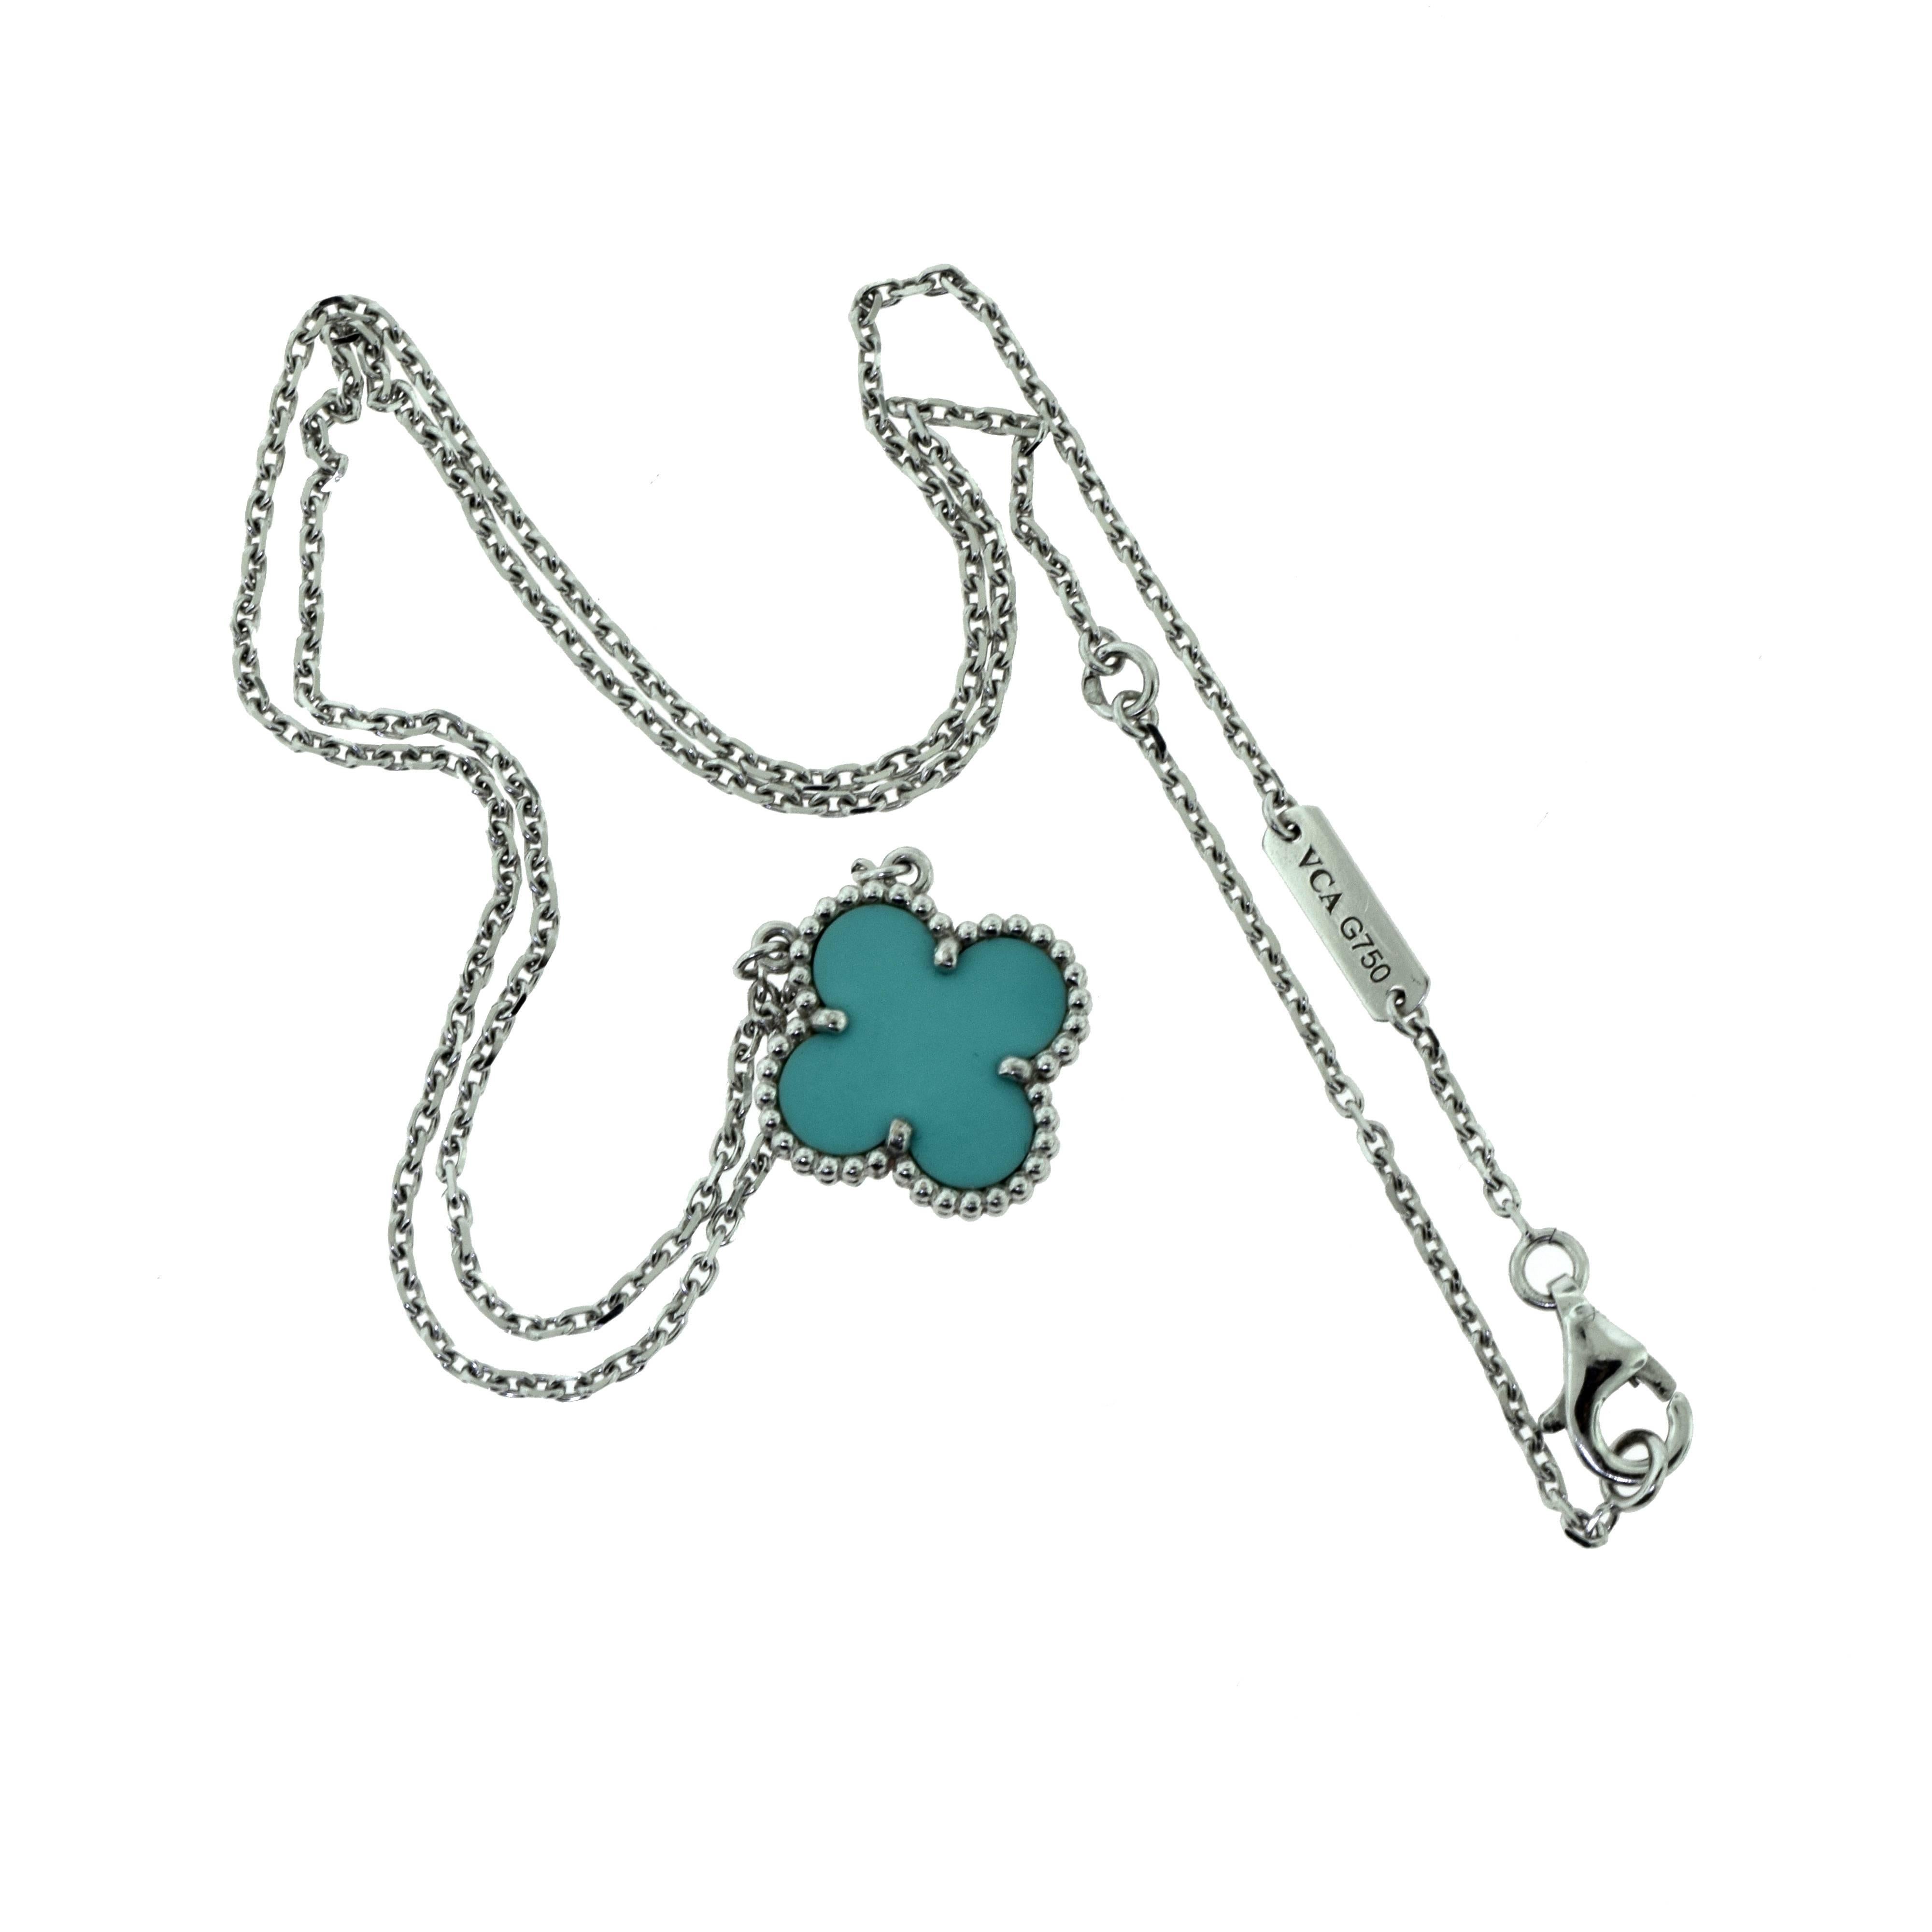 Van Cleef & Arpels Vintage Alhambra Turquoise Single Motif Necklace, White Gold In Excellent Condition For Sale In Miami, FL